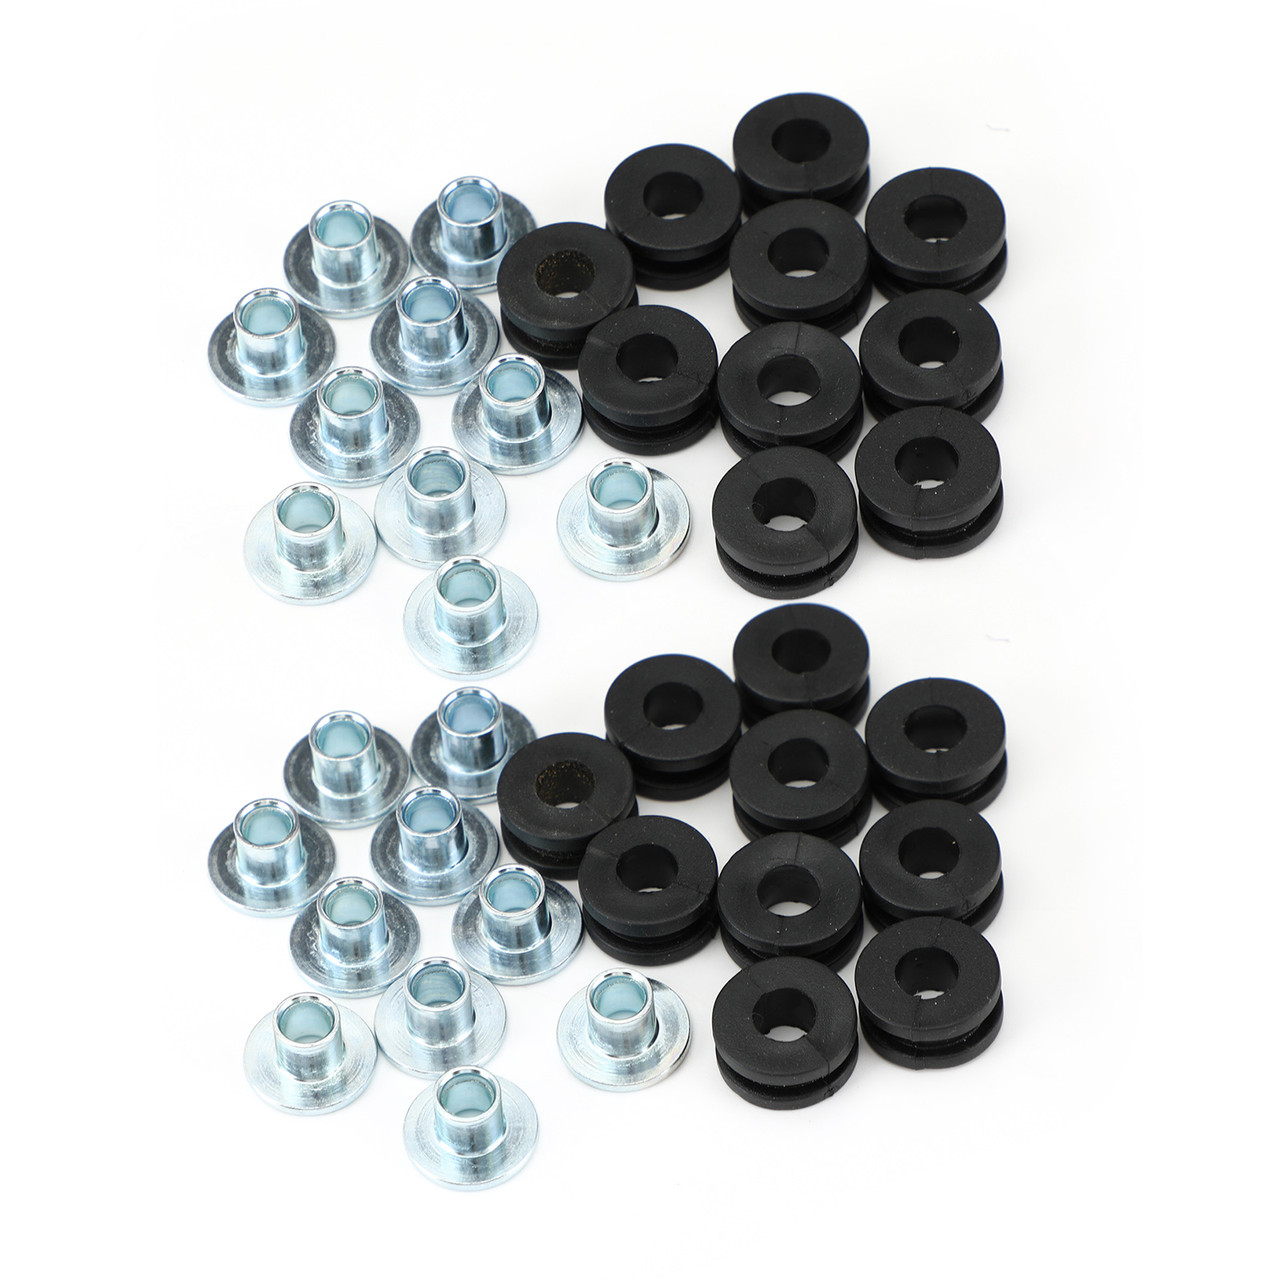 20 Pack M6 Motorcycle Side Panel Rubbers / Grommets Motorbike Kit Fit for Honda